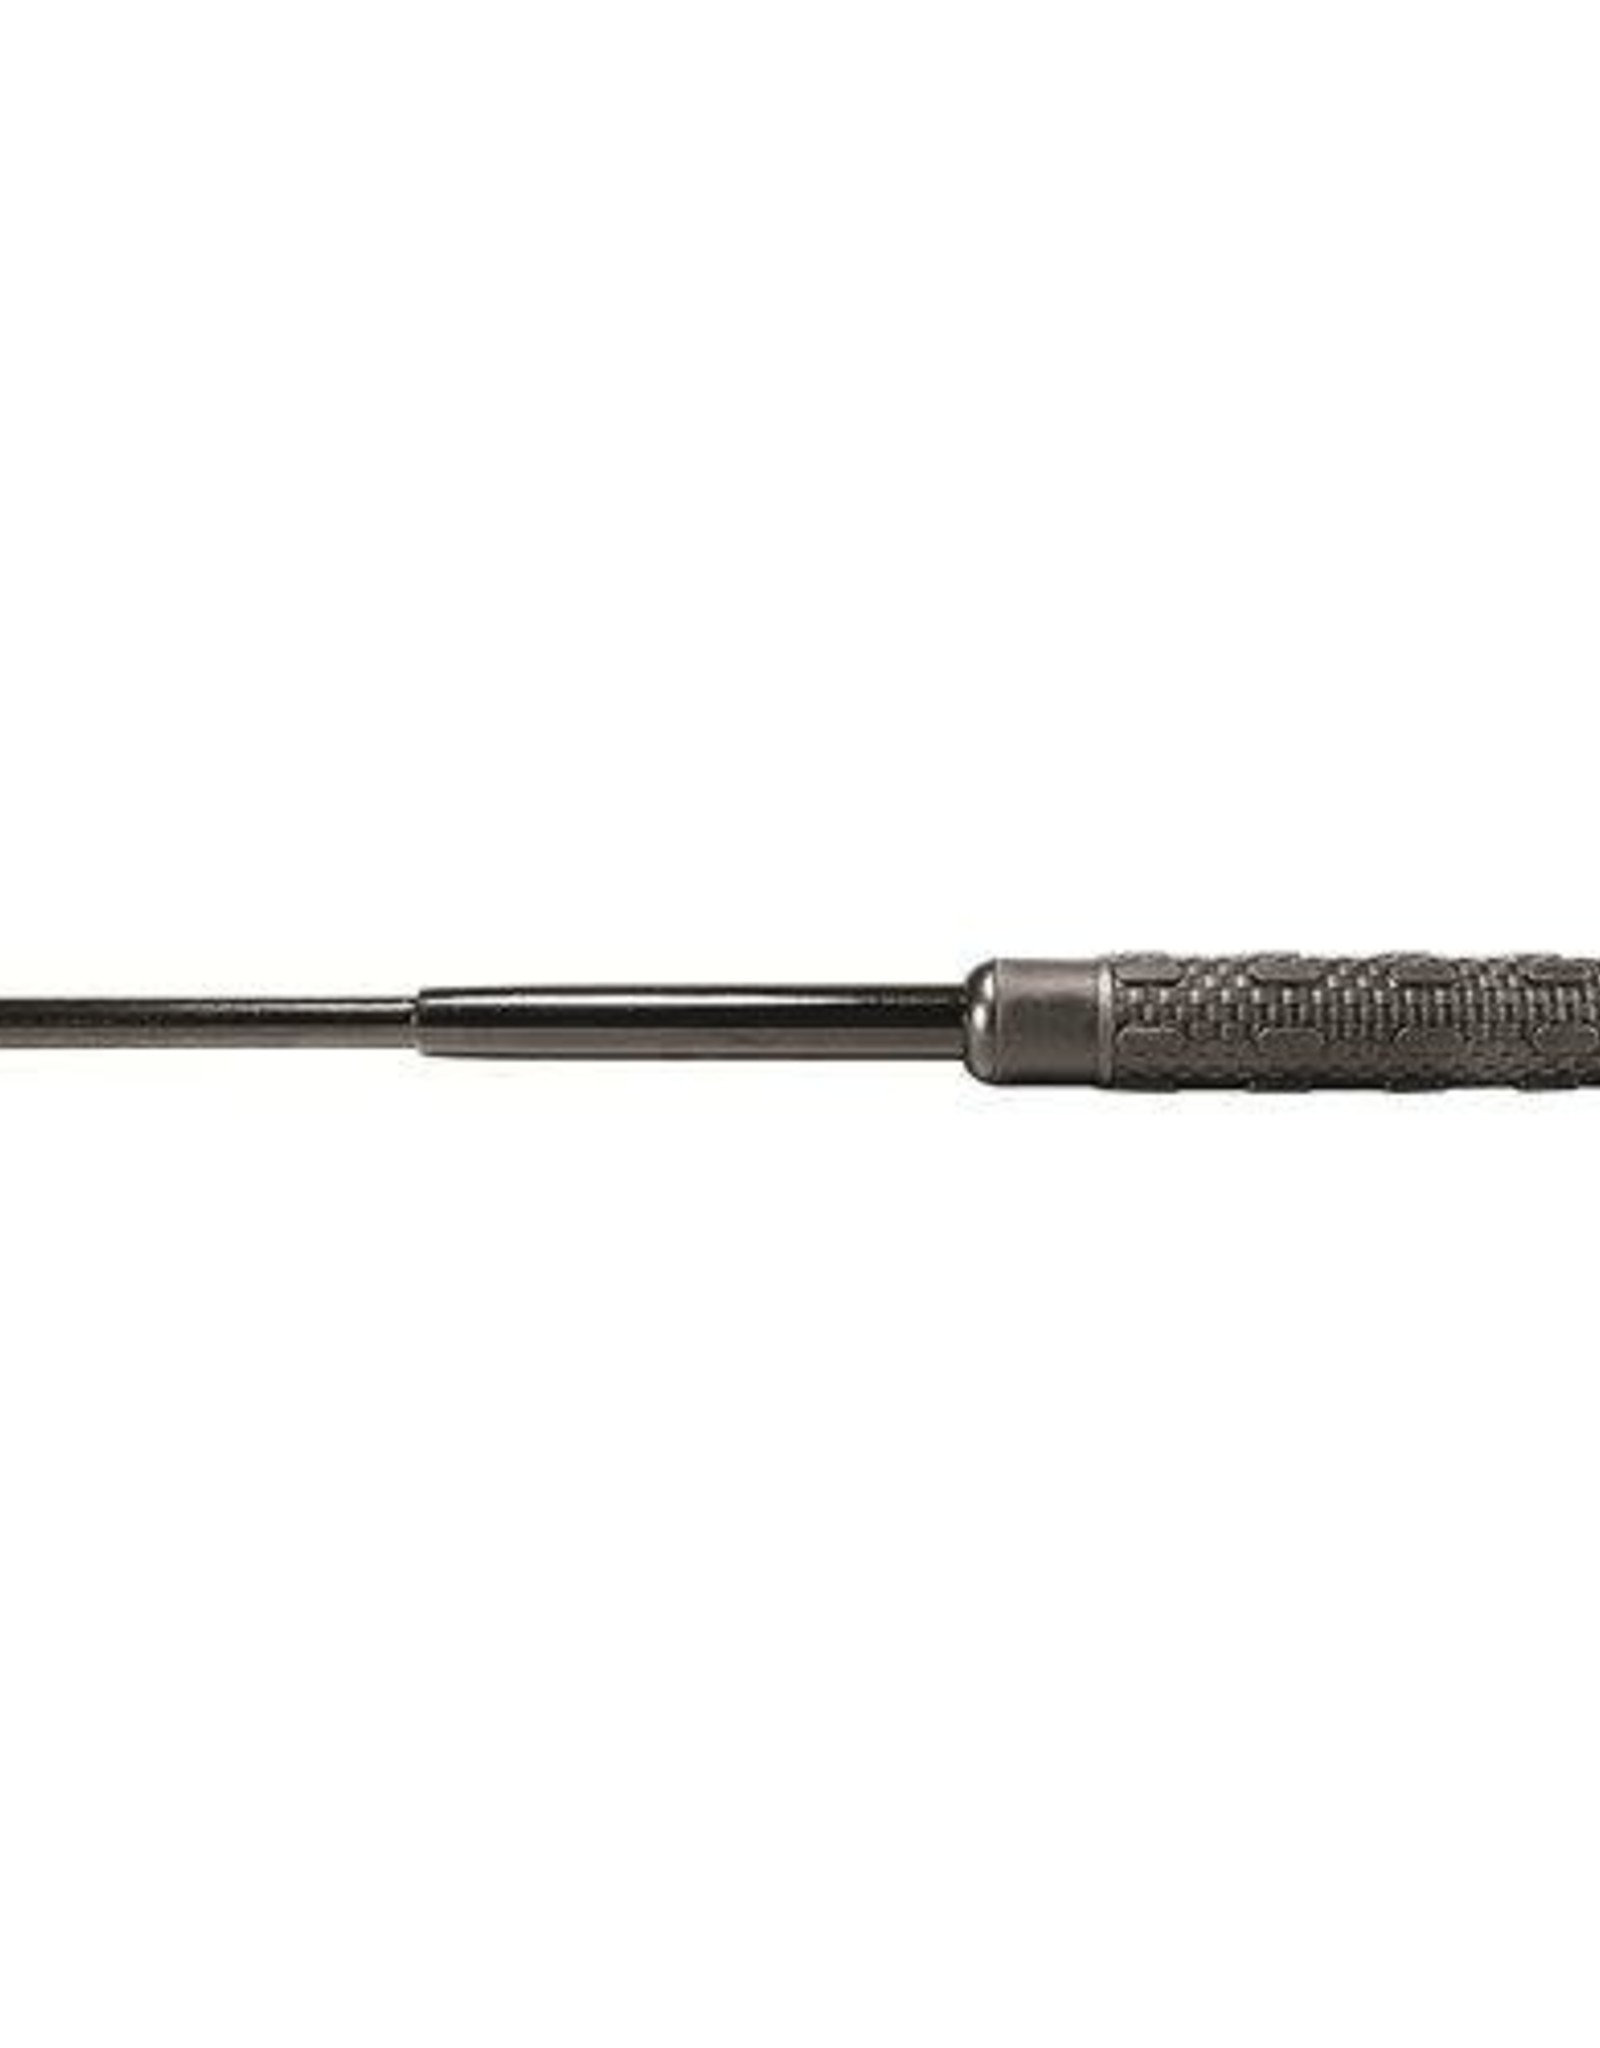 Smith & Wesson Collapsible Baton